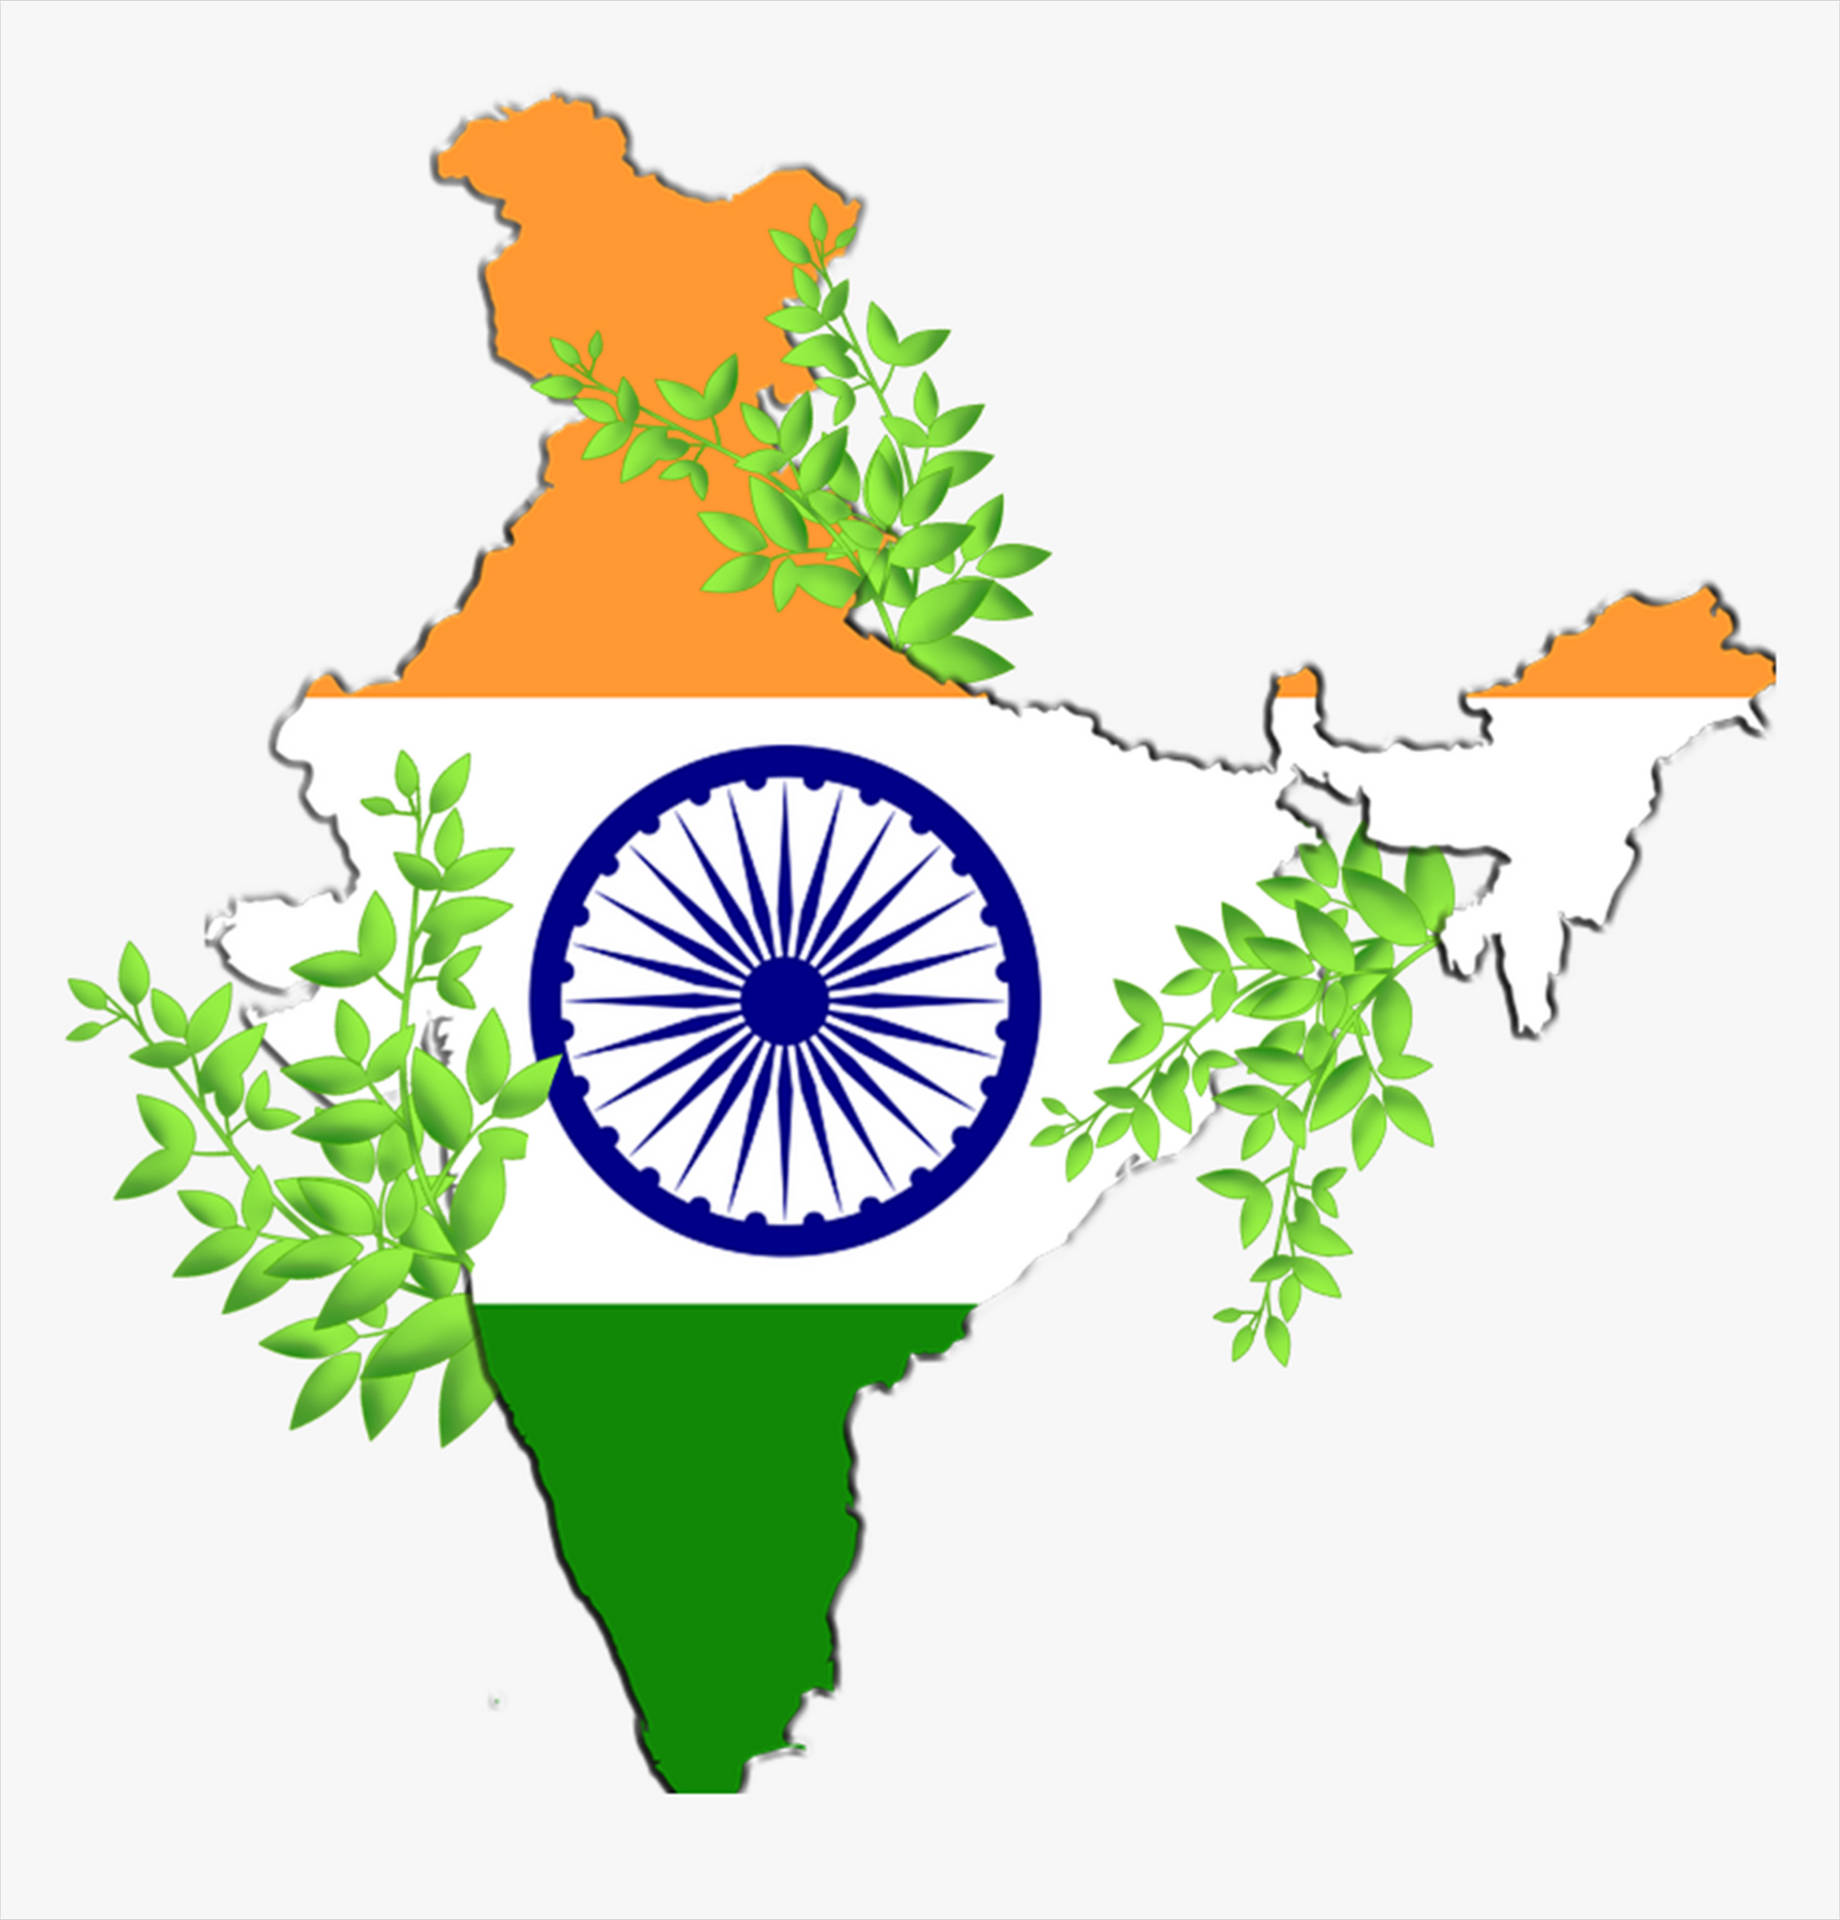 Free India Wallpaper Downloads, [700+] India Wallpapers for FREE |  